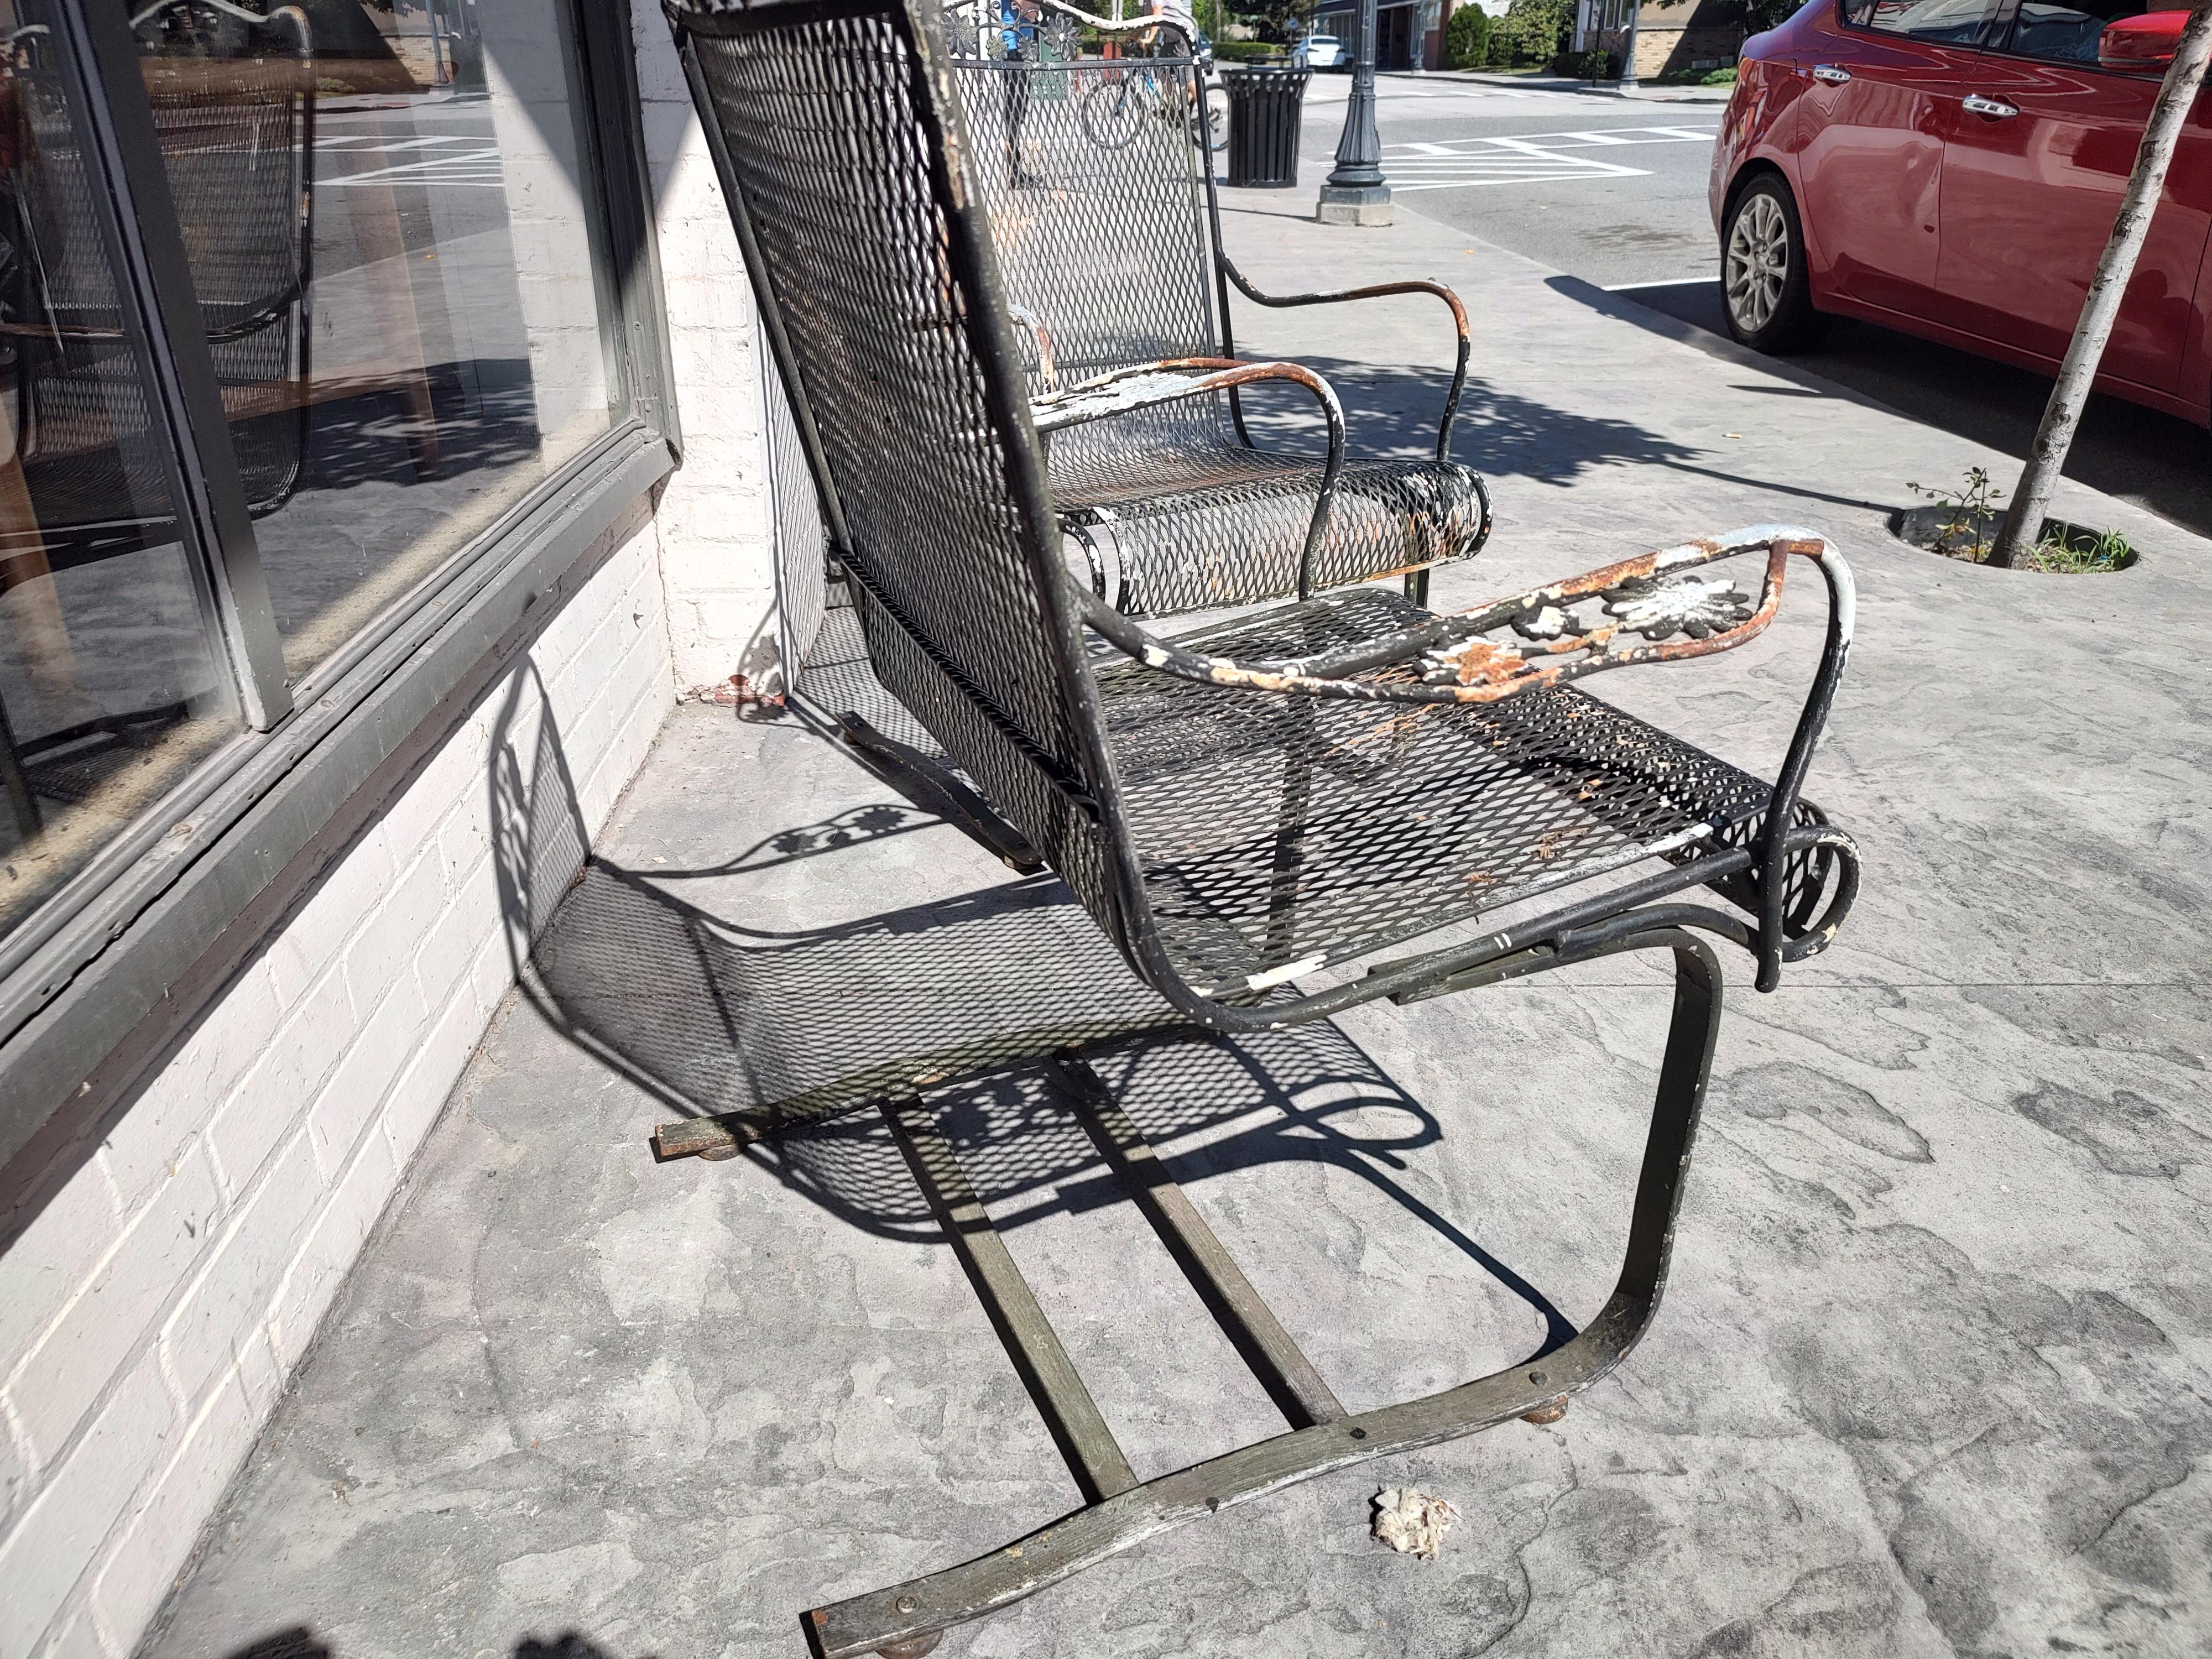 Fabulous pair of Woodard steel mesh bouncer spring chairs. Lots of patina. Floral decorations on the arms and back. So comfy and that spring! In excellent vintage condition with some surface rust.